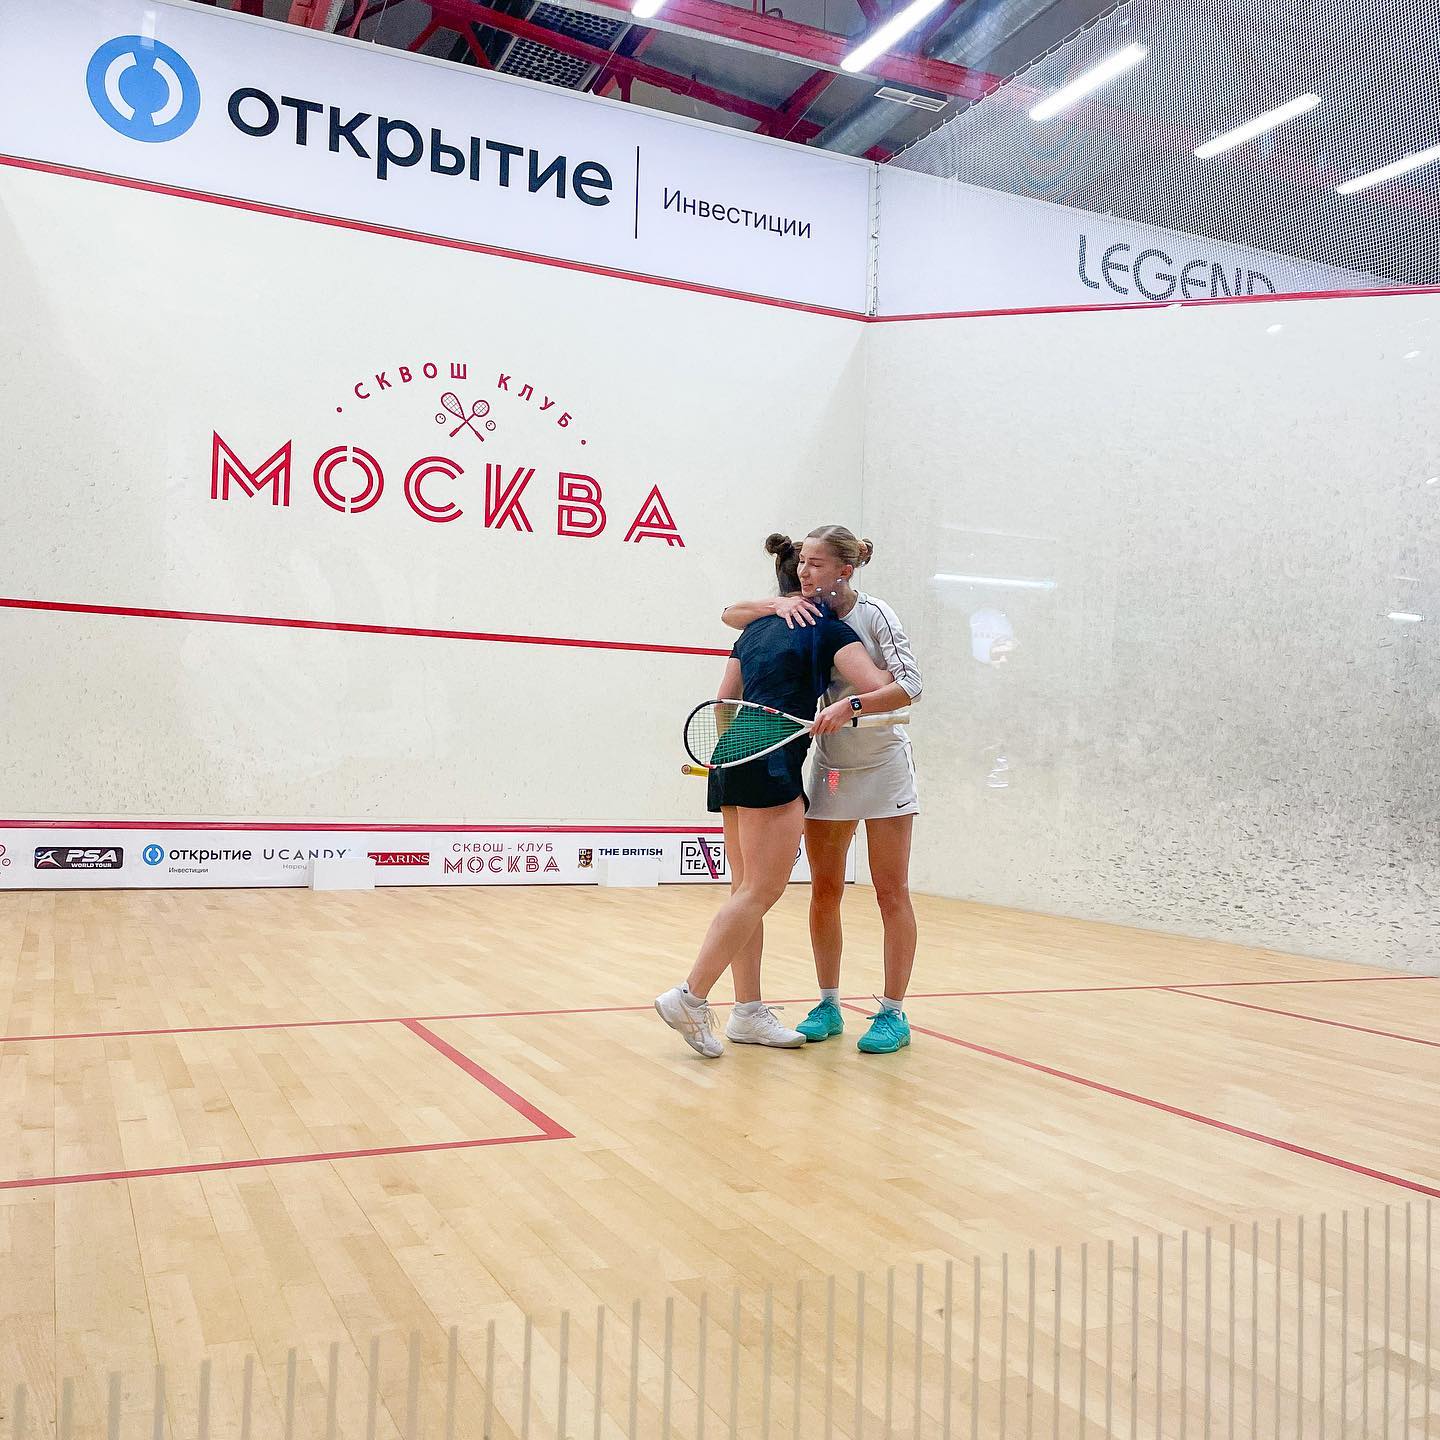 BIS a Partner of Largest Squash Tournament in Russia